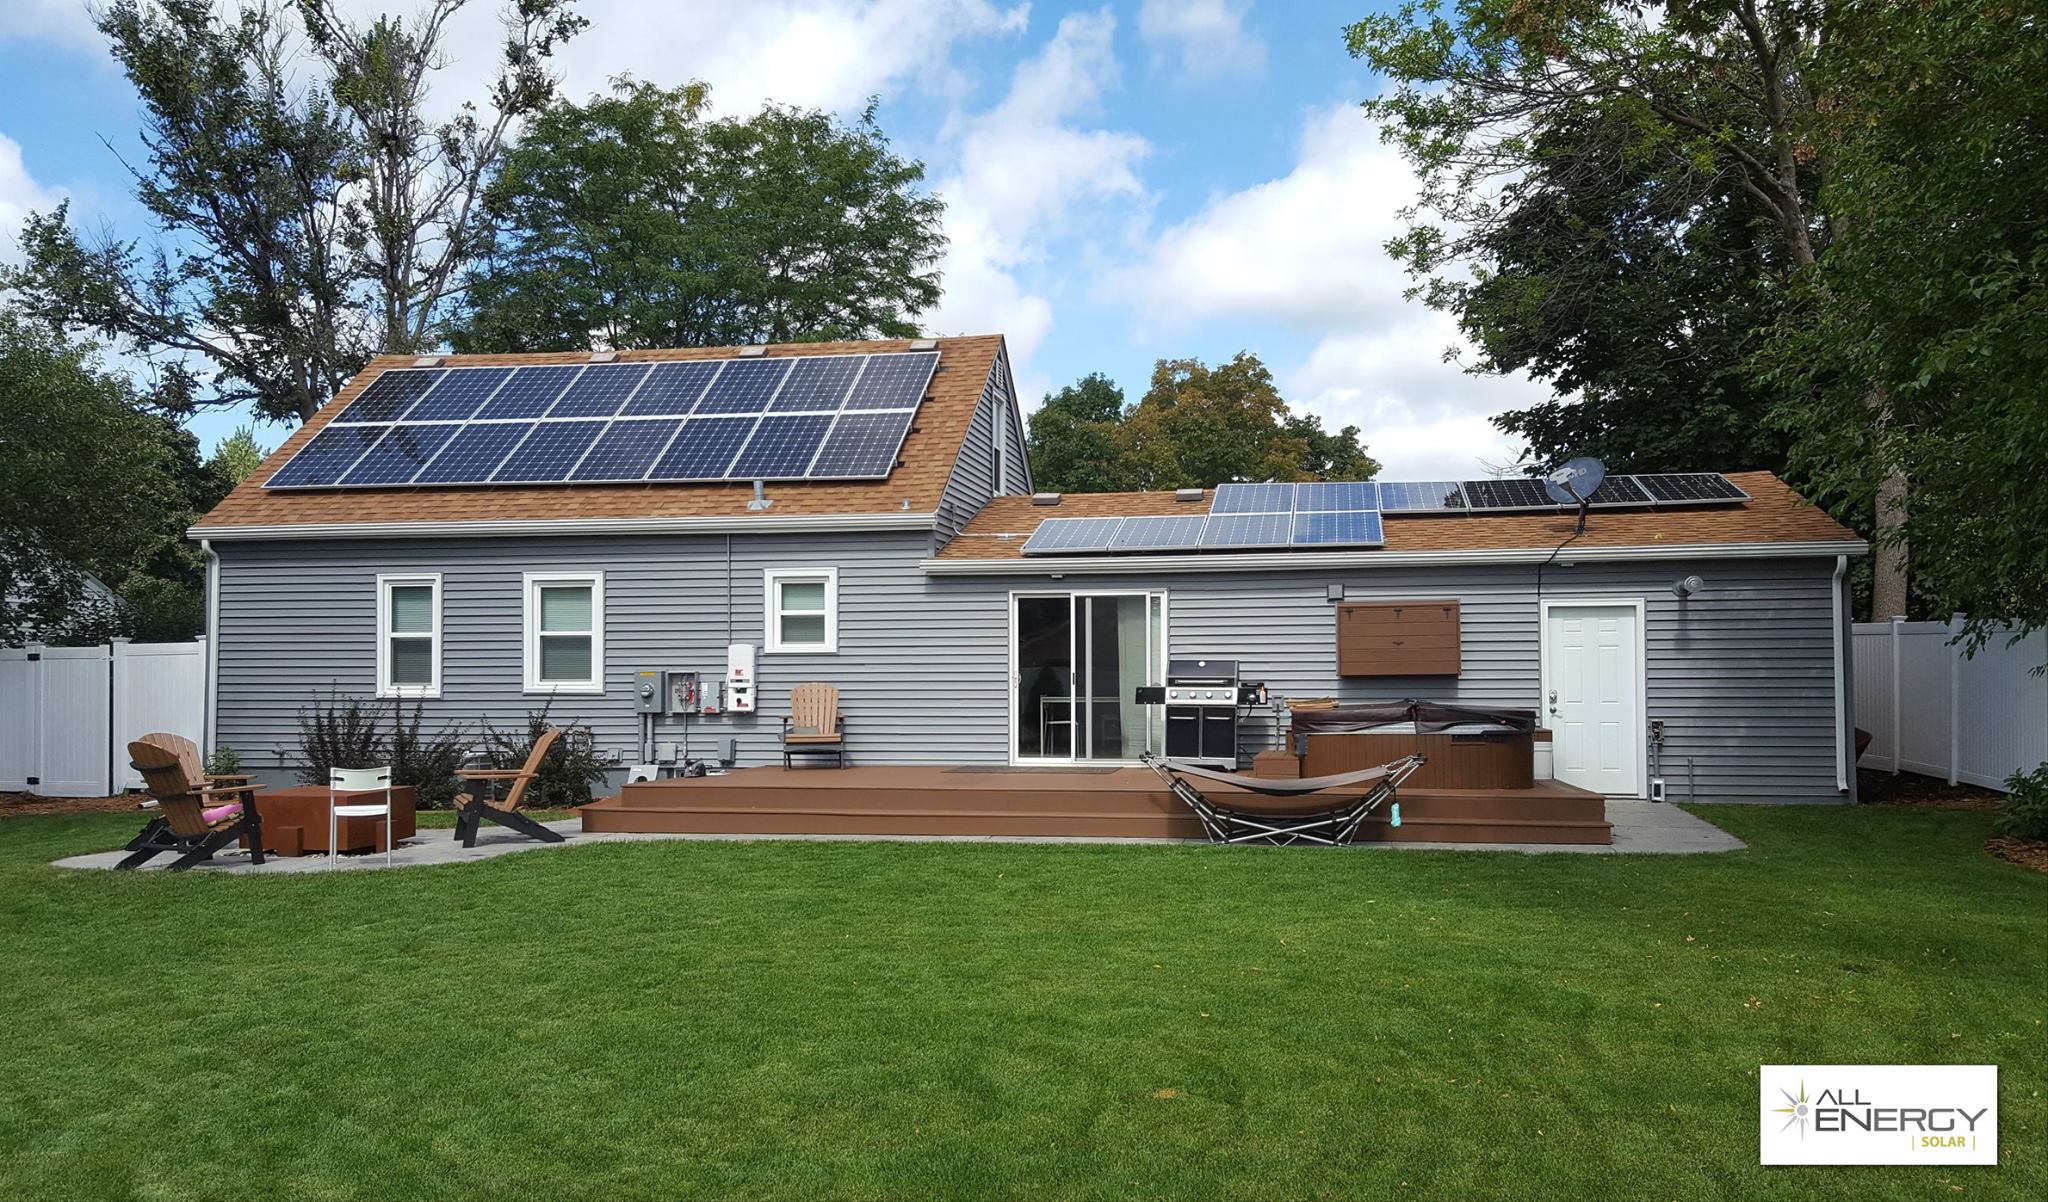 New Hampshire solar power incentives